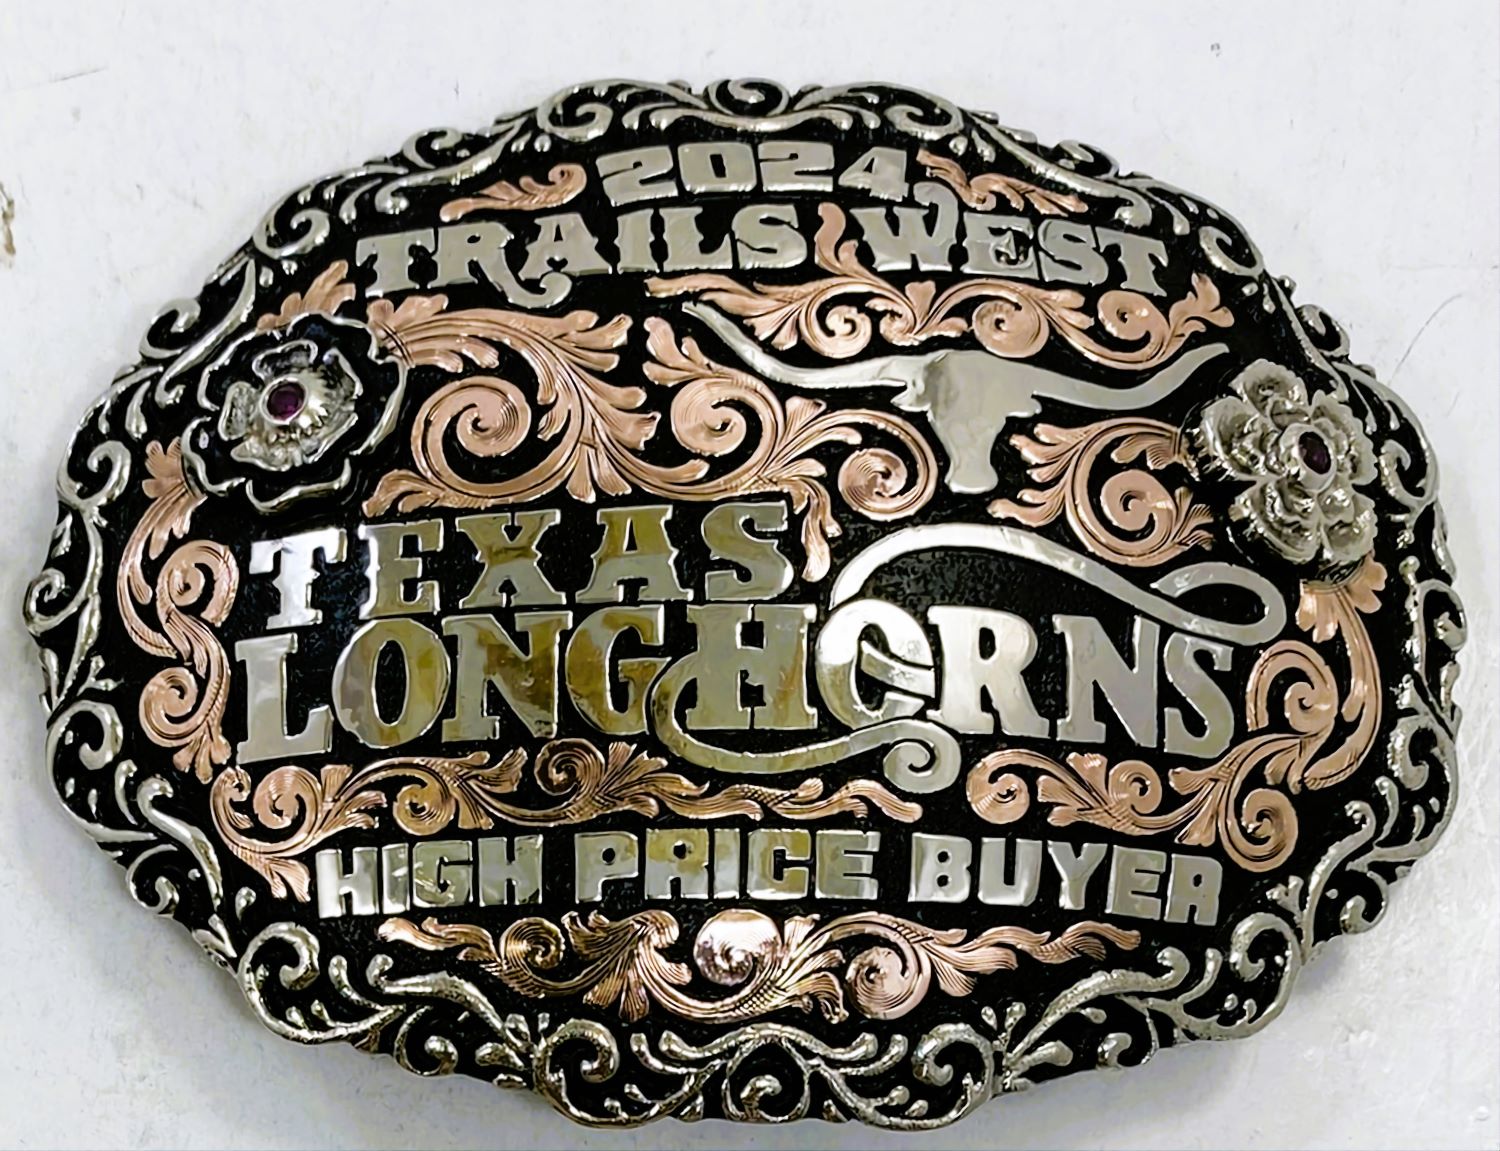 2024 Trails West buyer buckle